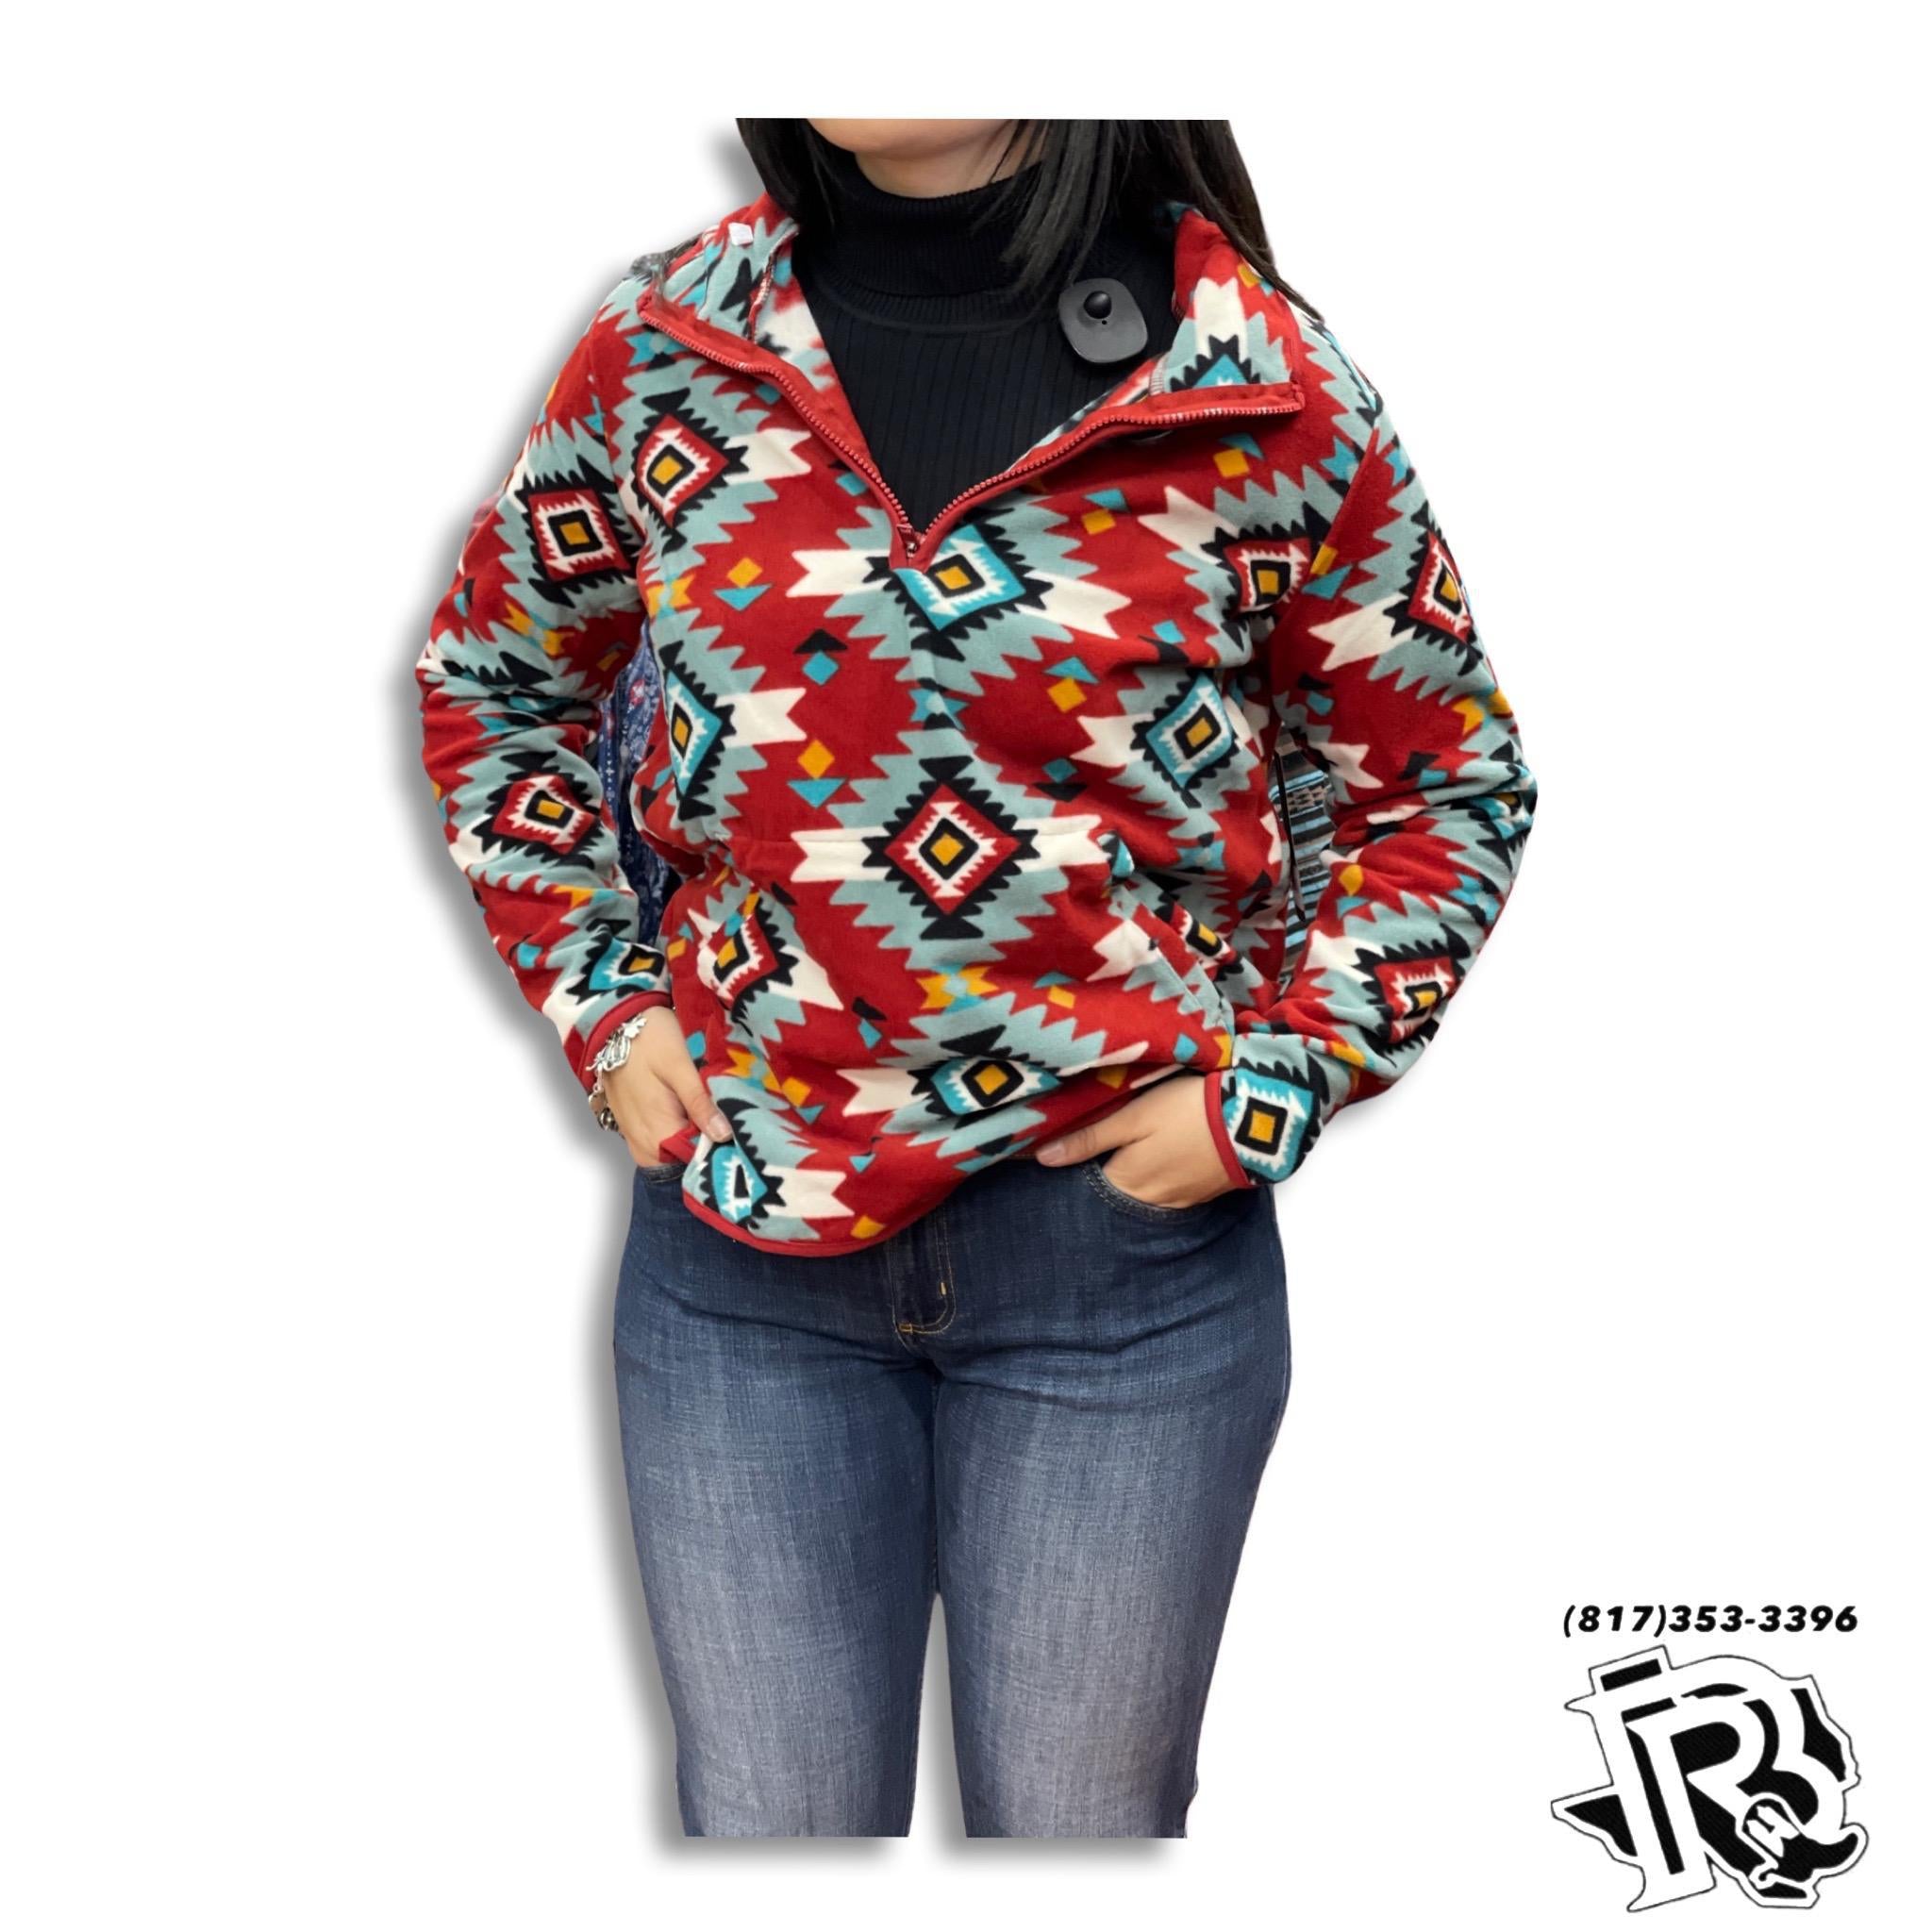 “ Harley “ | WOMEN SWEATER AZTEC RED MULTI COLOR 112317299